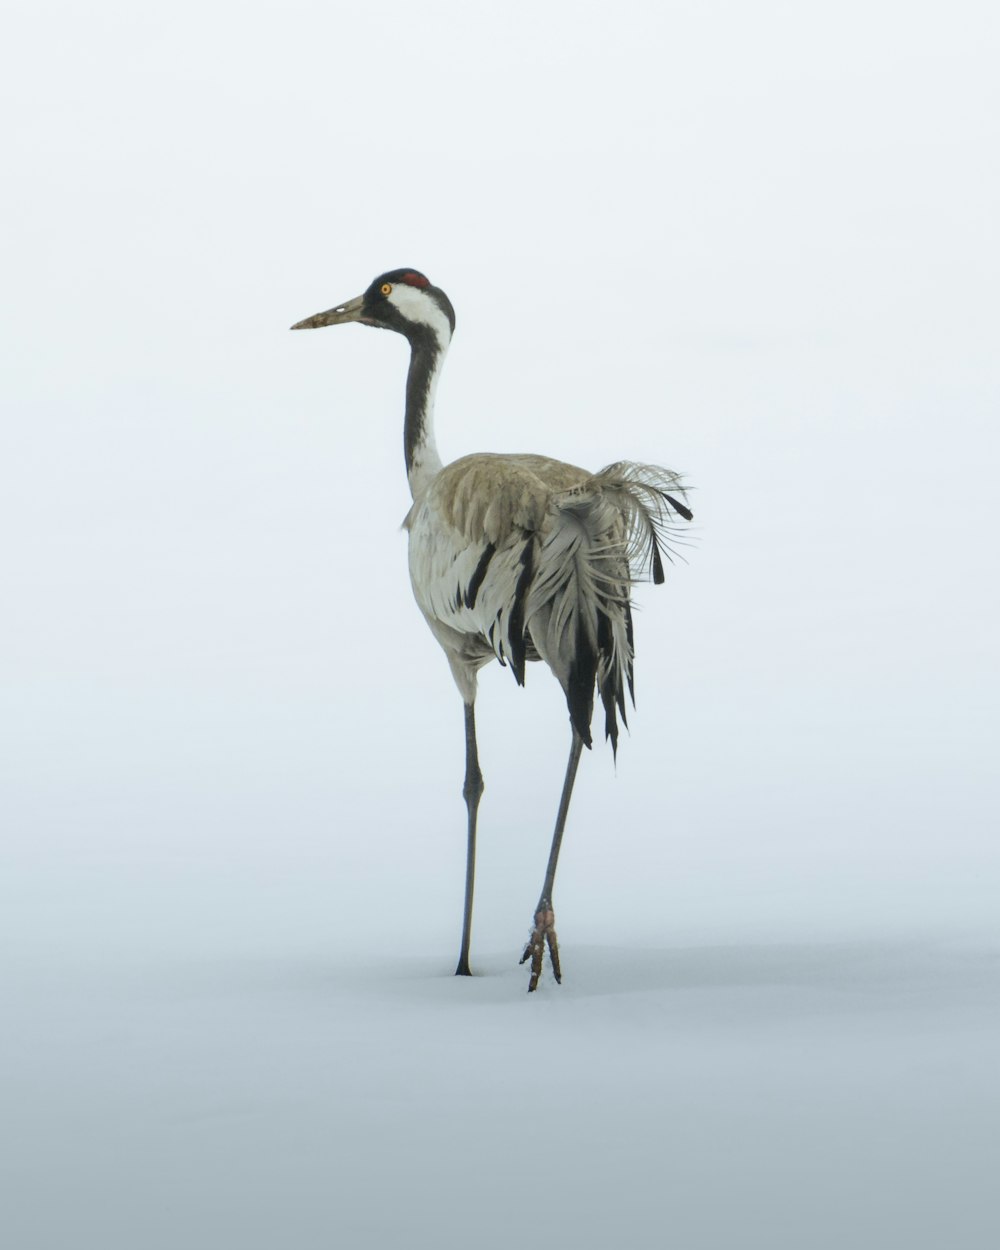 a crane standing in the snow on a white background